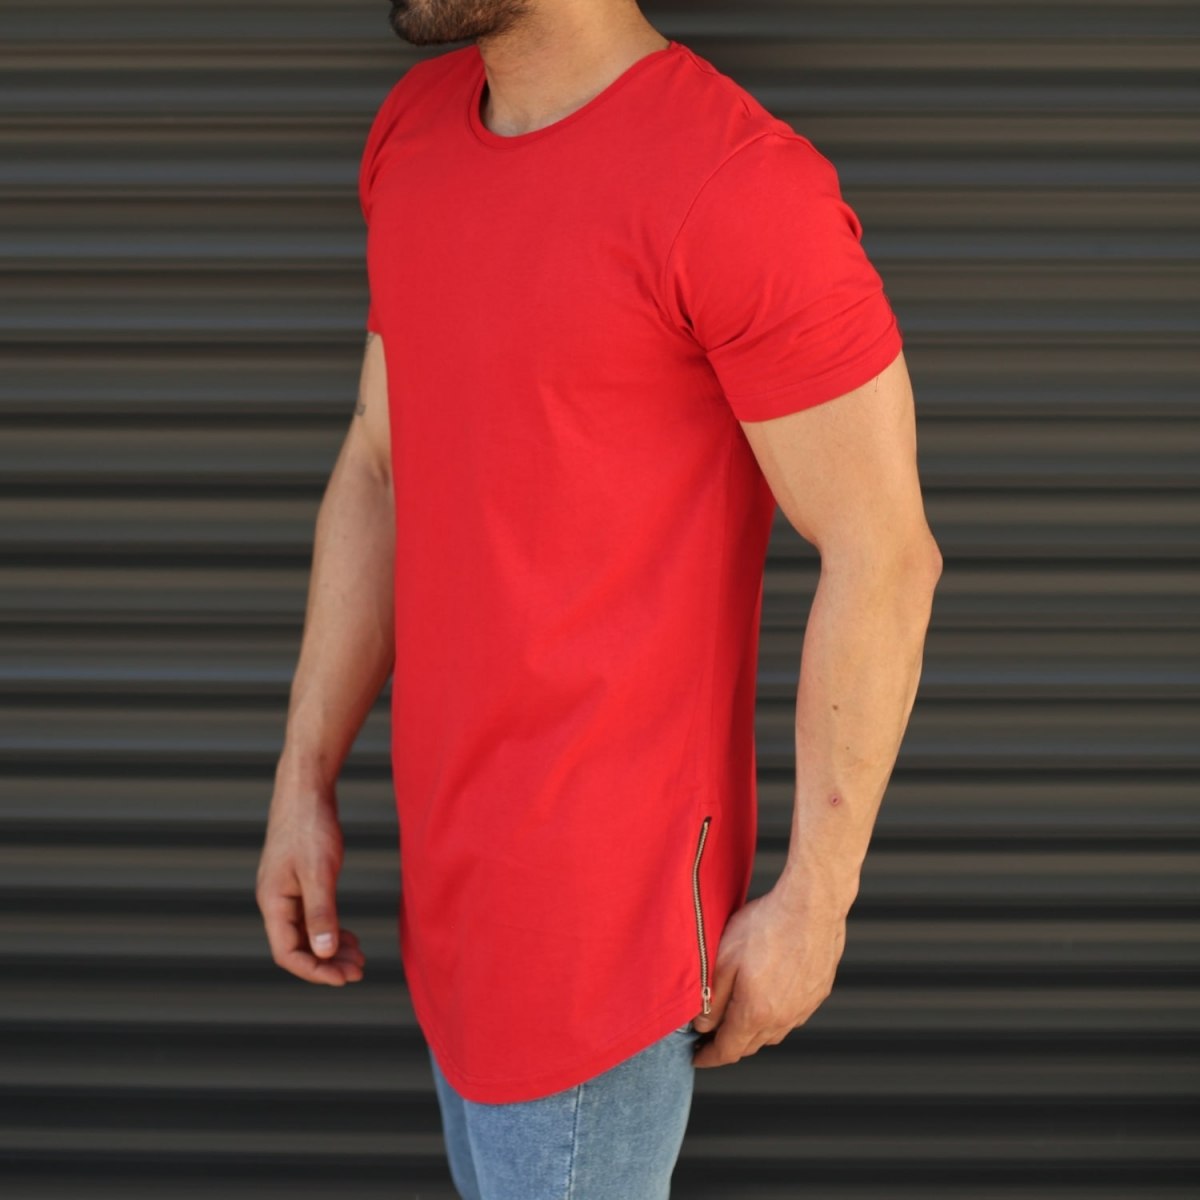 Men's Longline Round Neck T-Shirt With Zipper In Red - 3